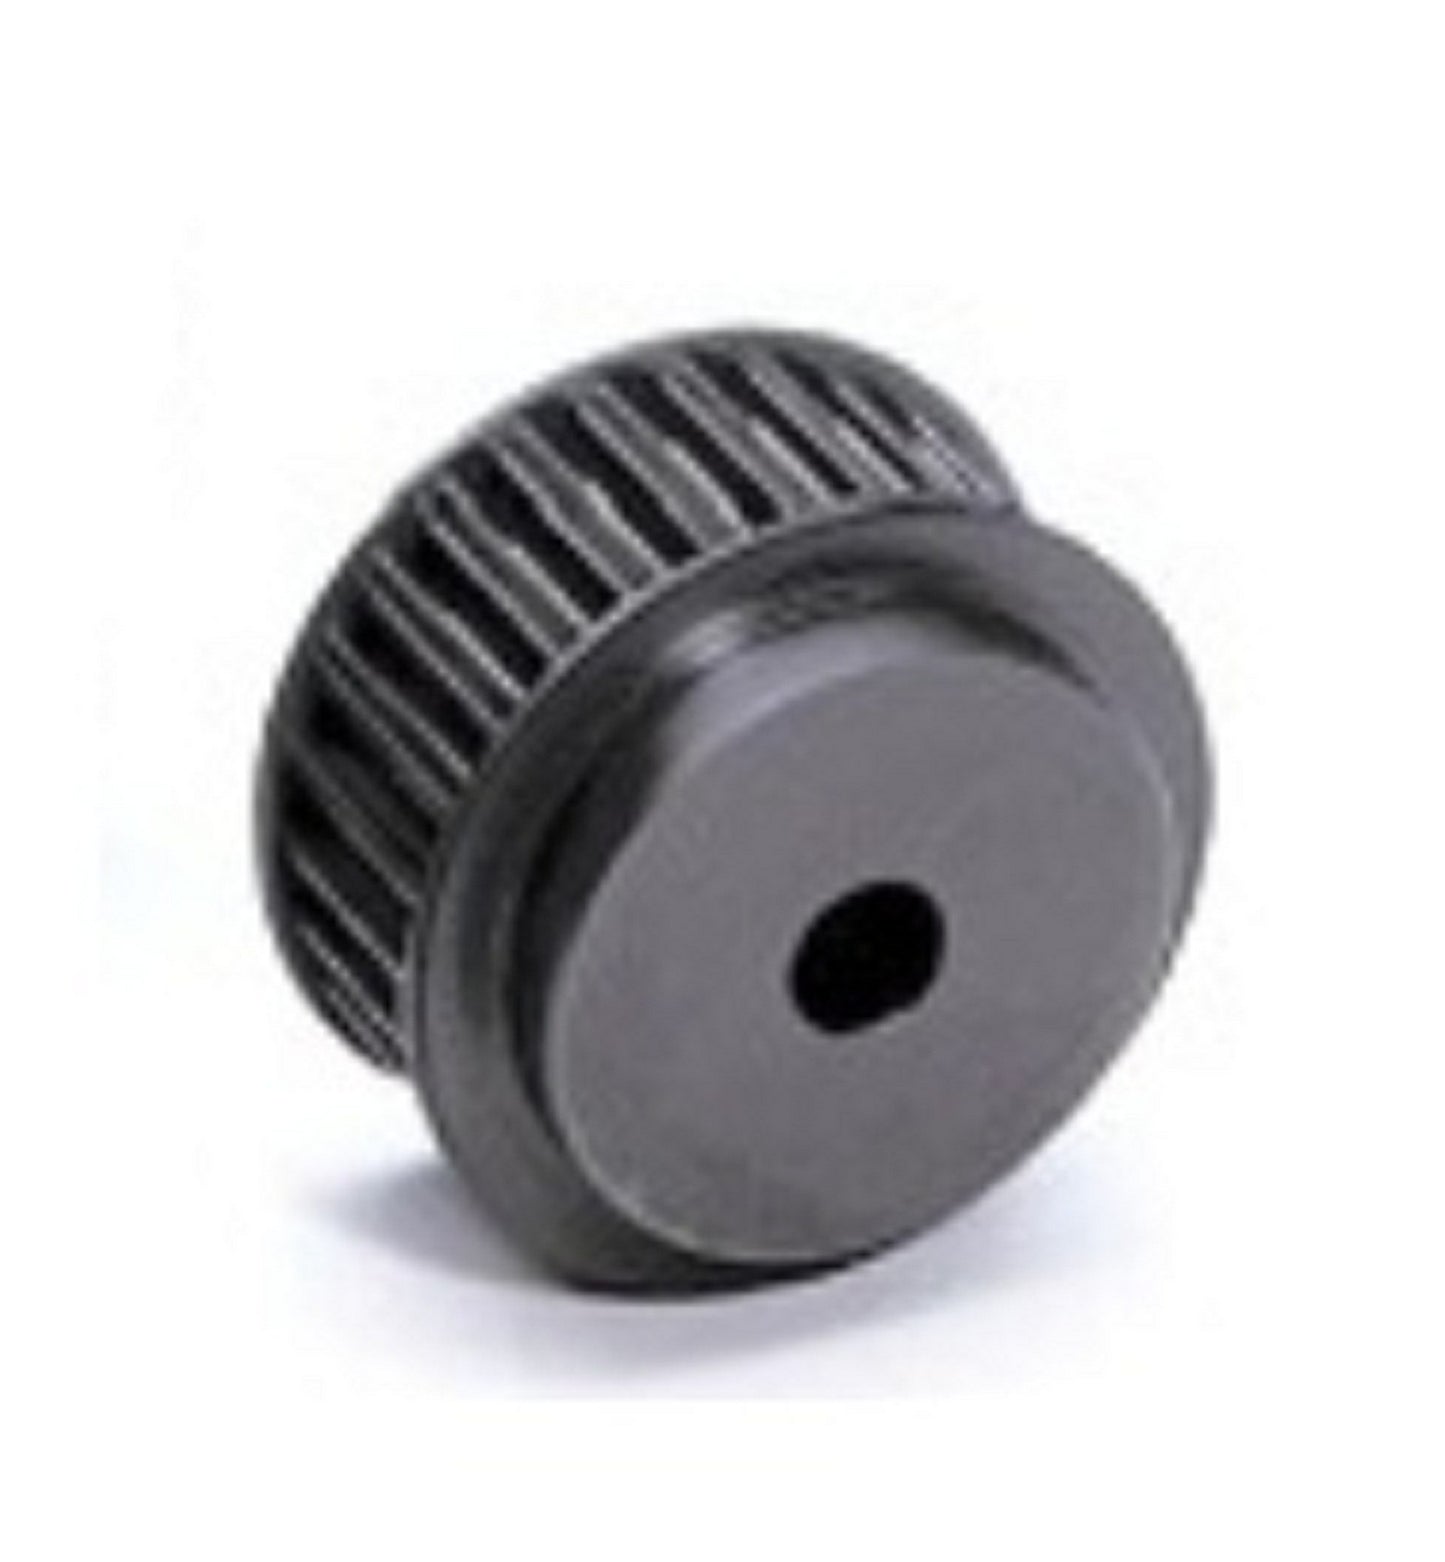 20-8M-30 Steel Pulley 20 tooth MPB